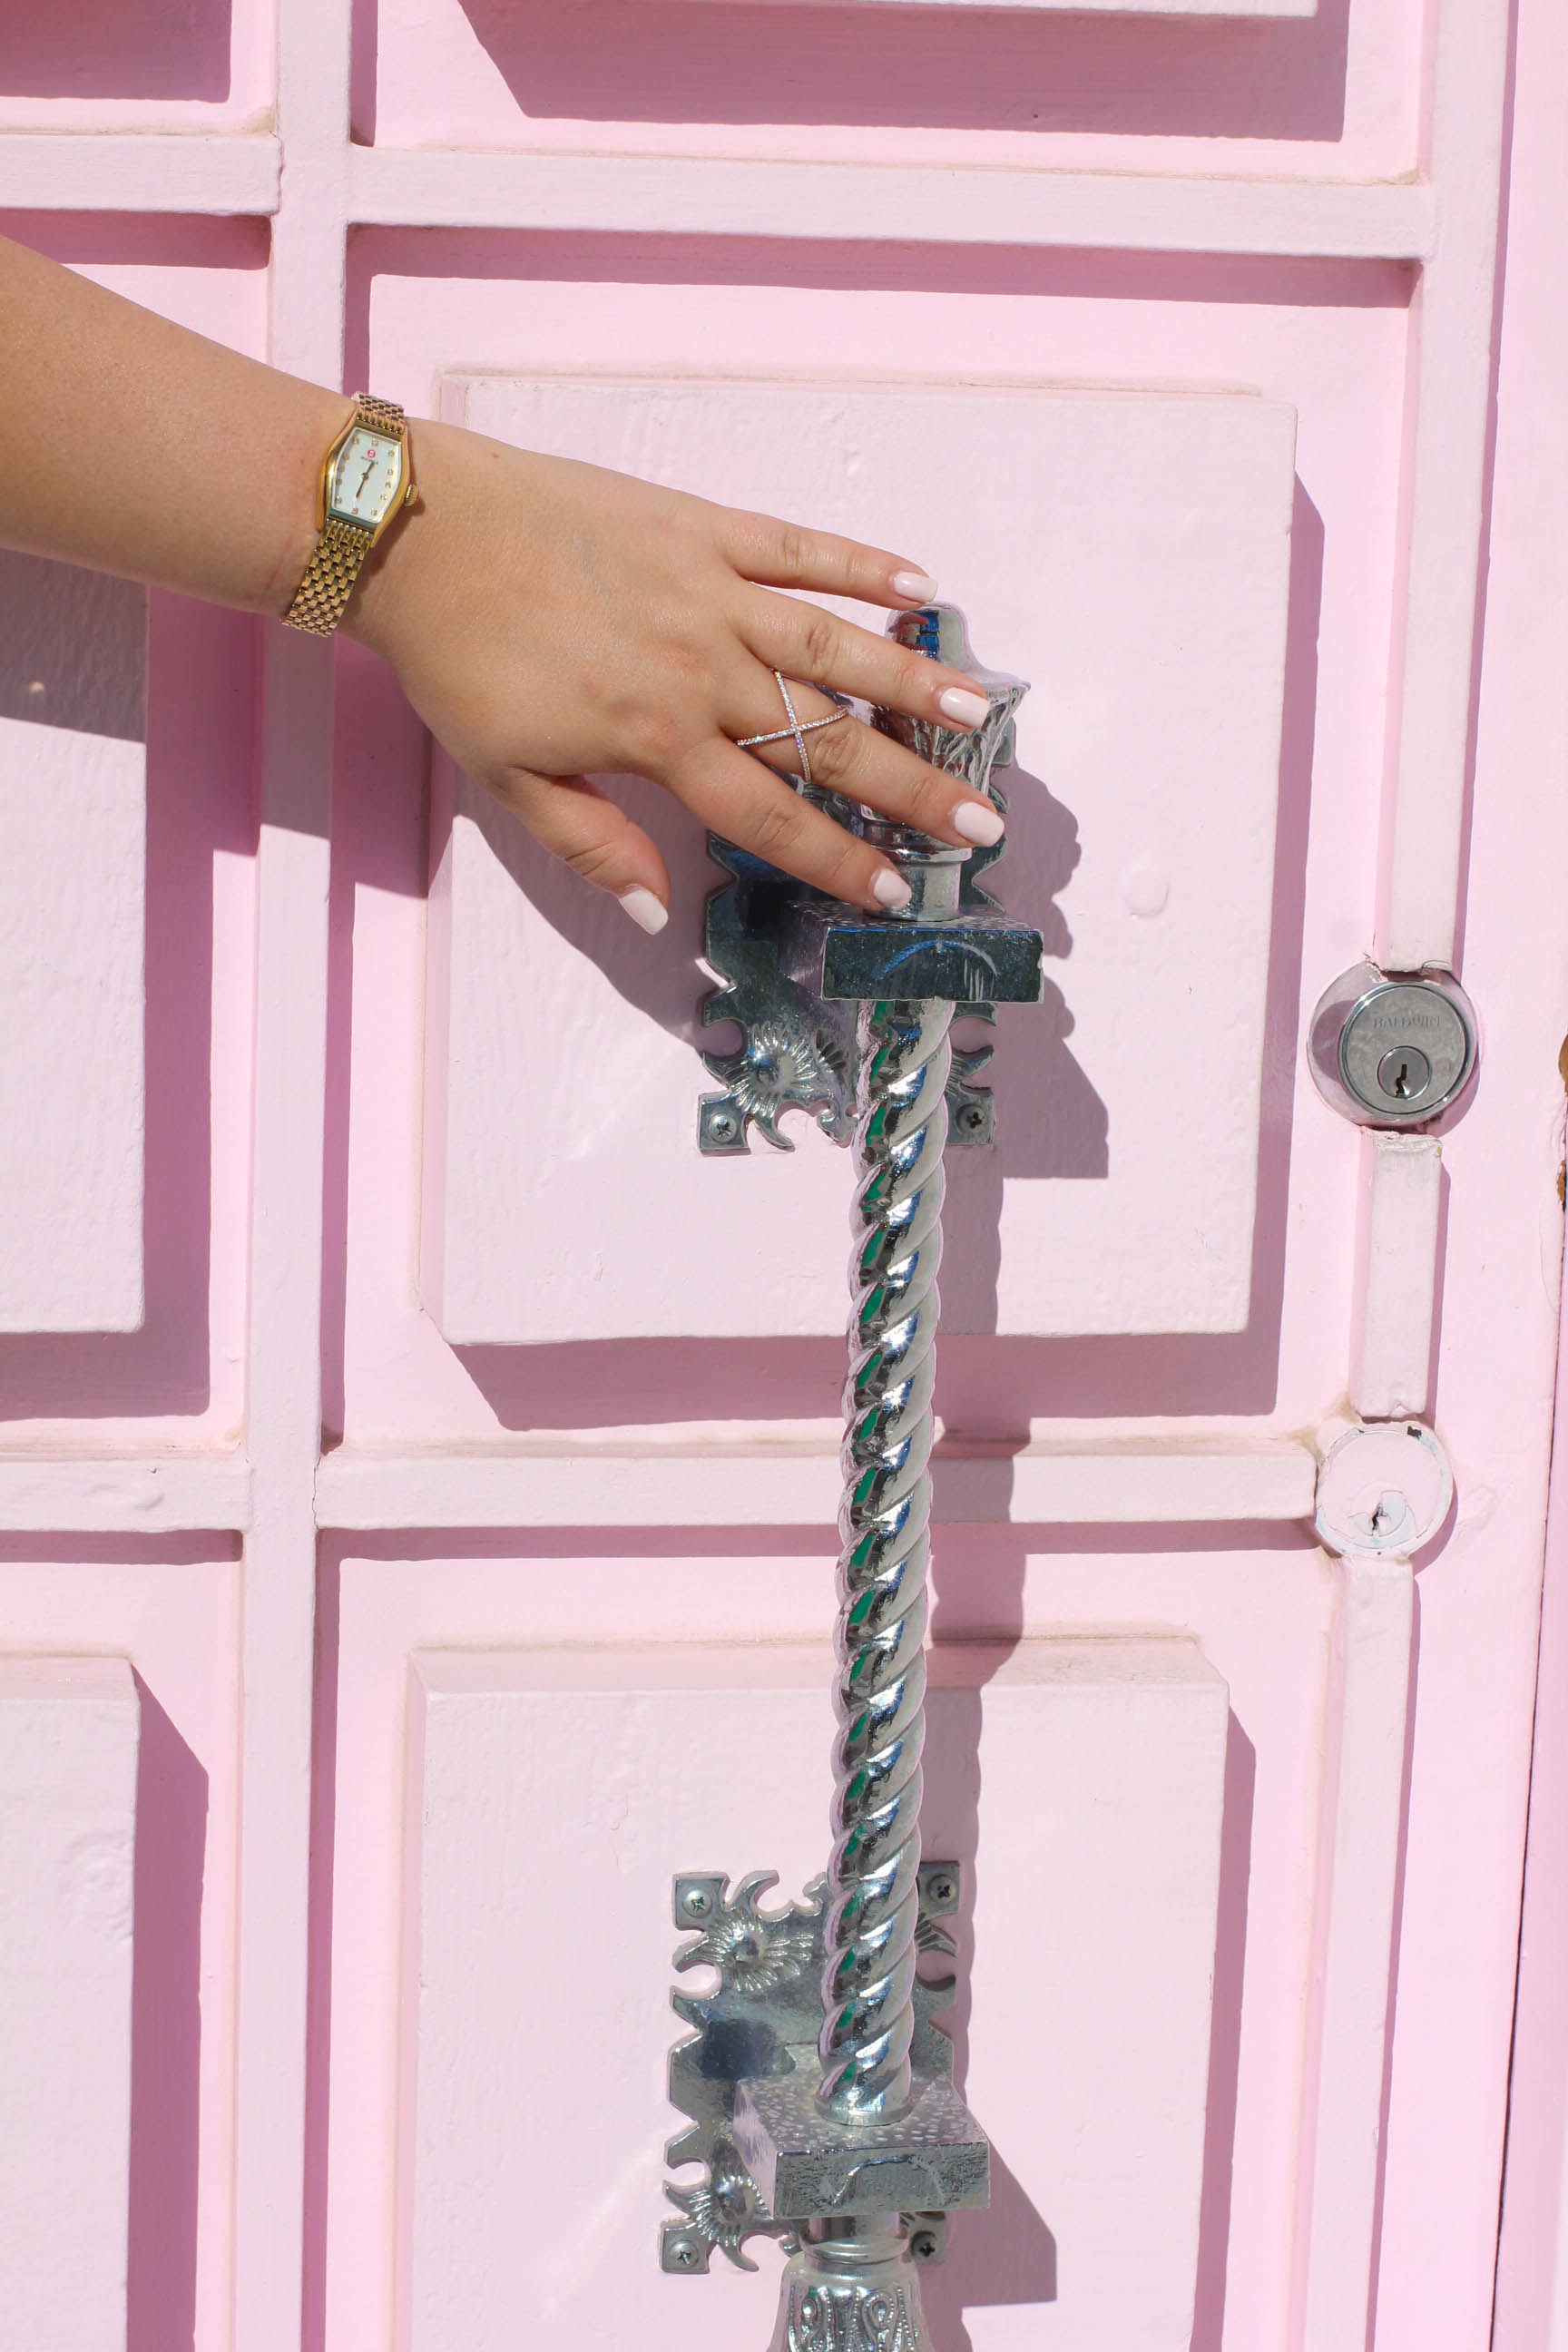 gianvito rossi lace up sandals, gianvito rossi, barneys ny, barneys warehouse sale, barneys sale, pink aviators, green dress, palm springs, palm springs pink door, pink door, instagram doors, wall charades, instagram doors, i have a thing with doors, missyonmadison, melissa tierney, missyonmadison instagram, la blogger, blogger style, turning 25, 25 things, happy birthday, birthday, birthday style, fashion blogger, mint green dress, green pleated dress, fuschia heels,